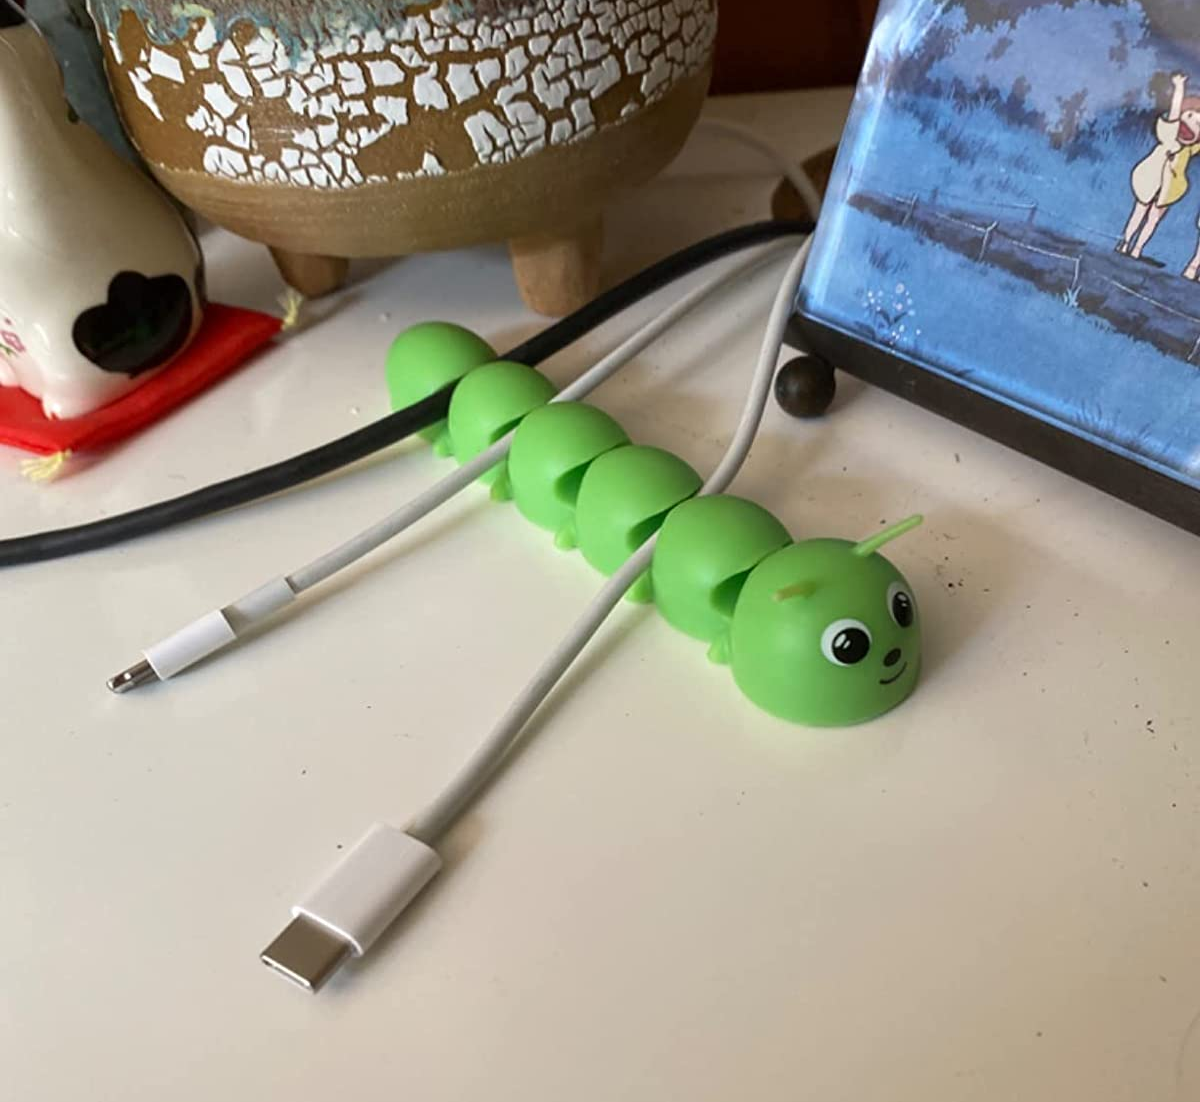 Reviewer's caterpillar cord organizer on their desk holding their cables securely